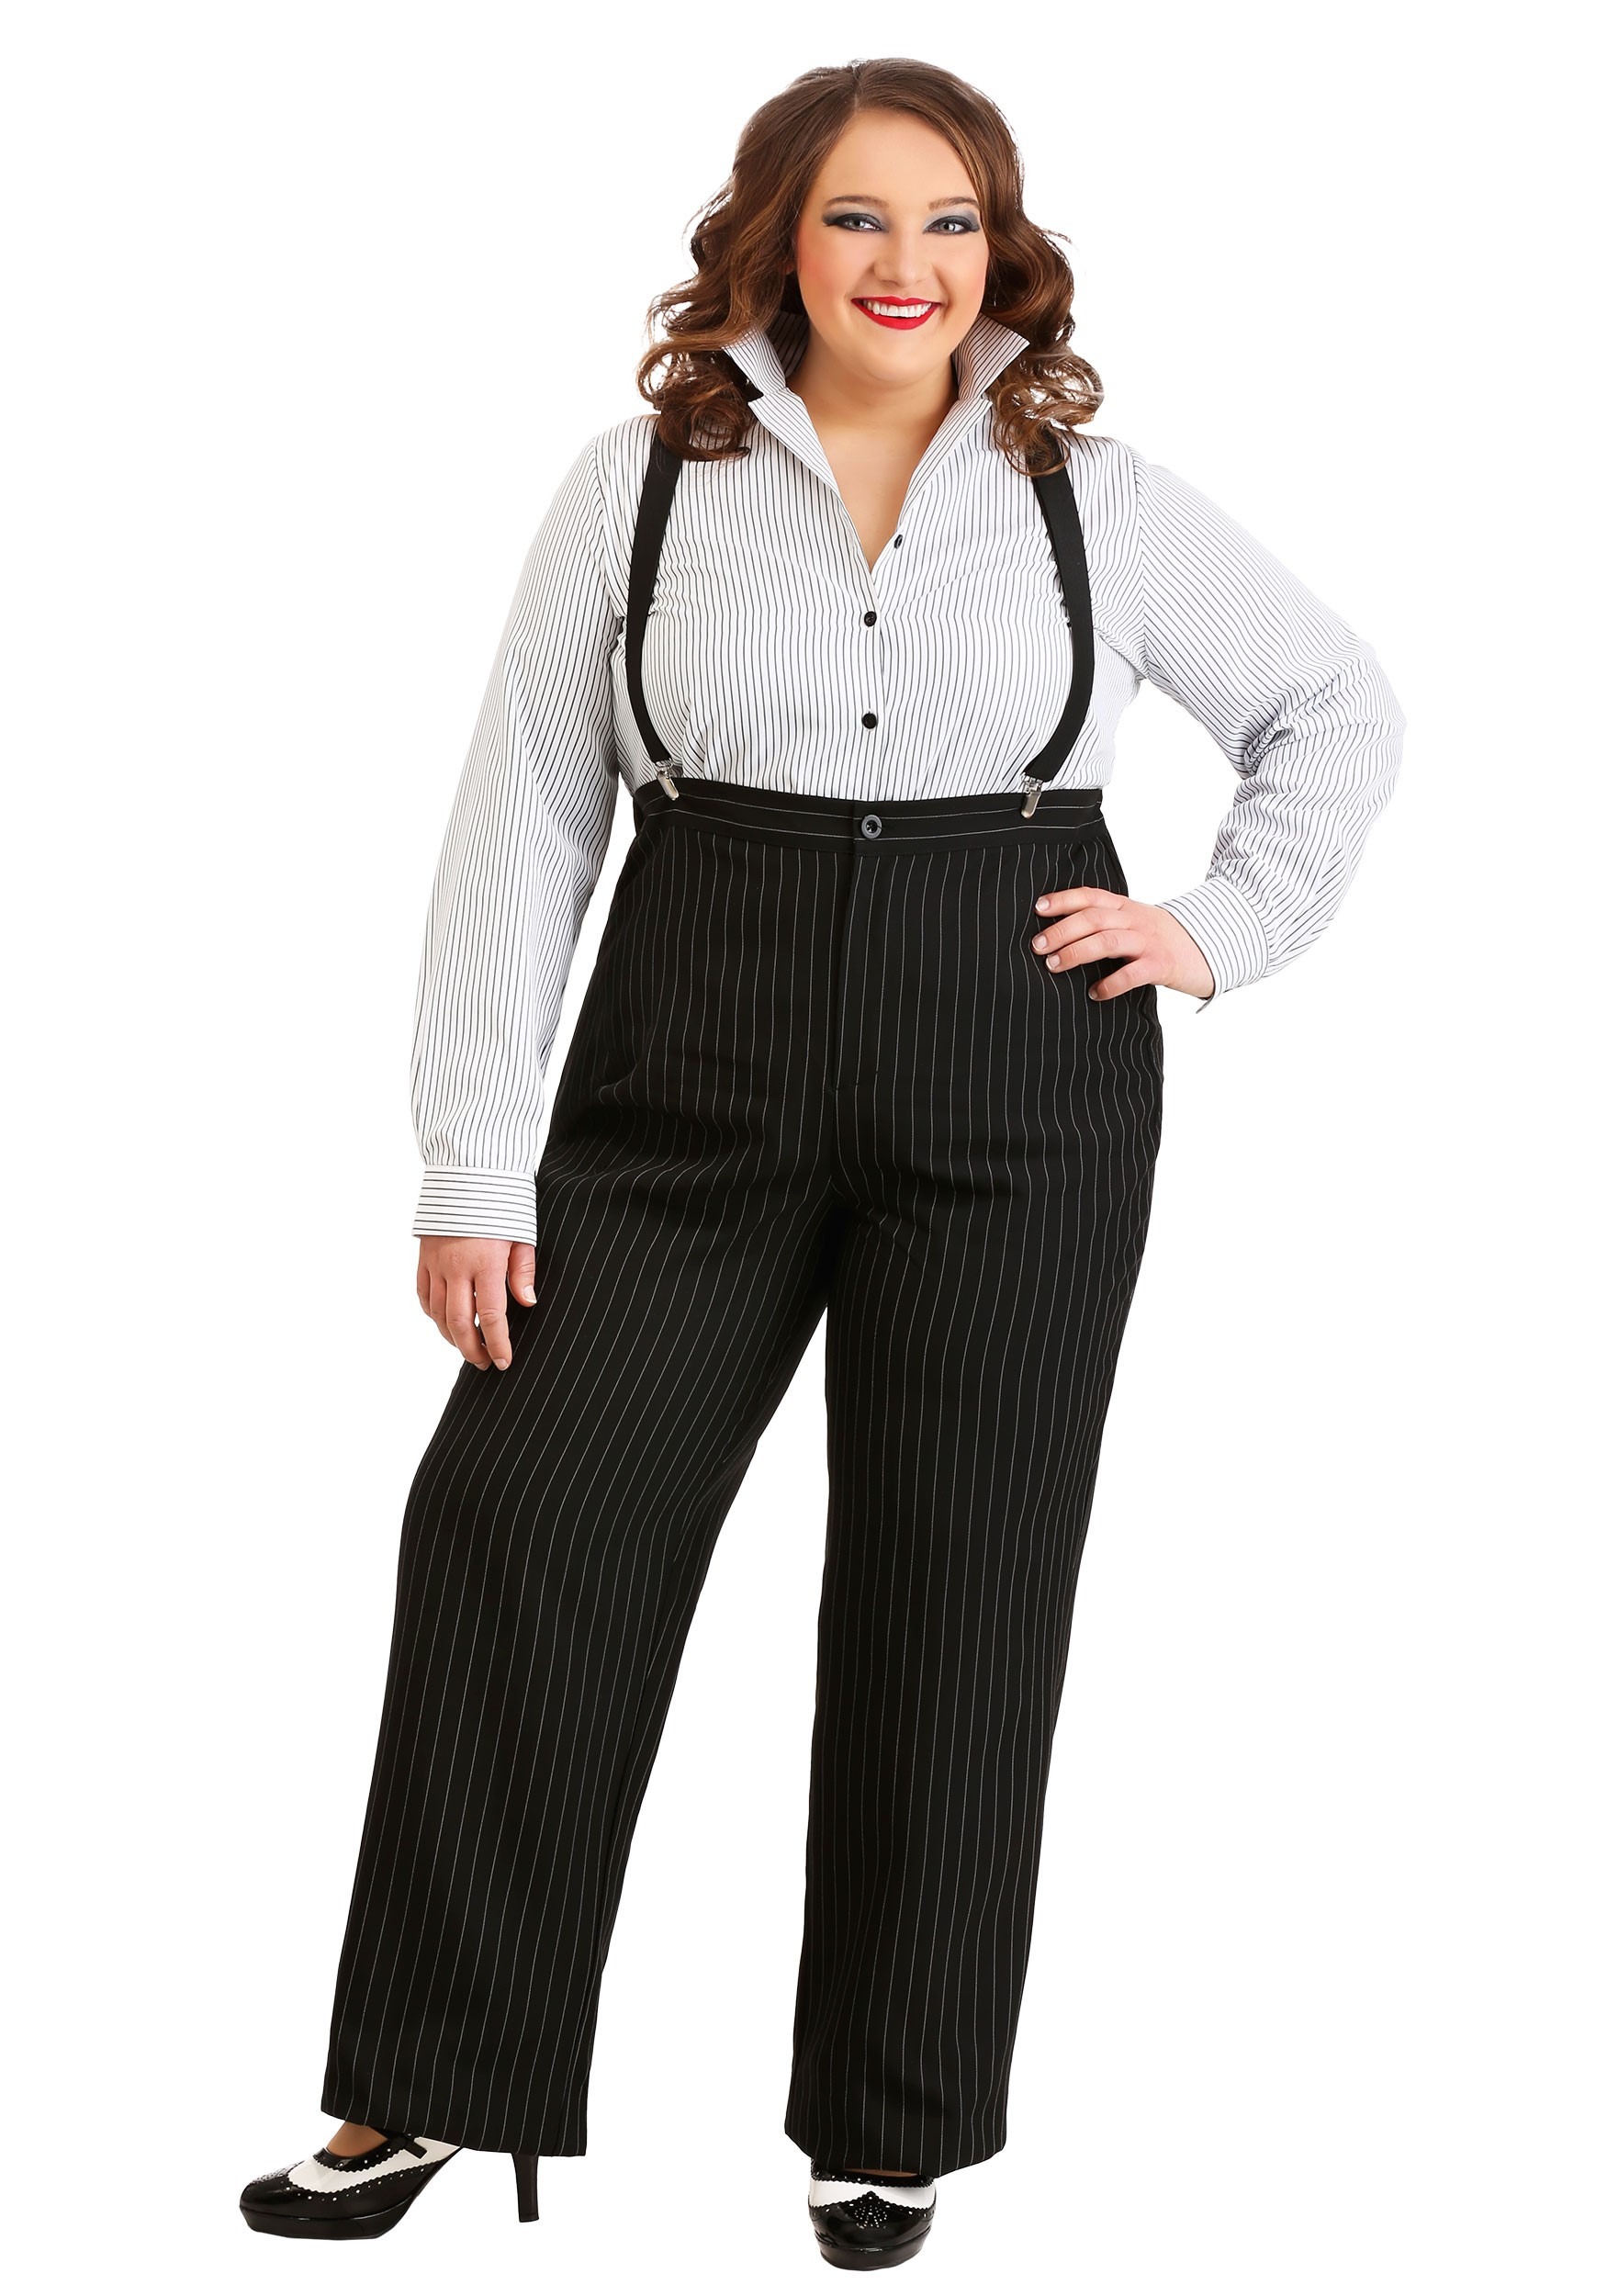 1920s Plus Size Gangster Lady Costume | Plus Size Costumes for Women